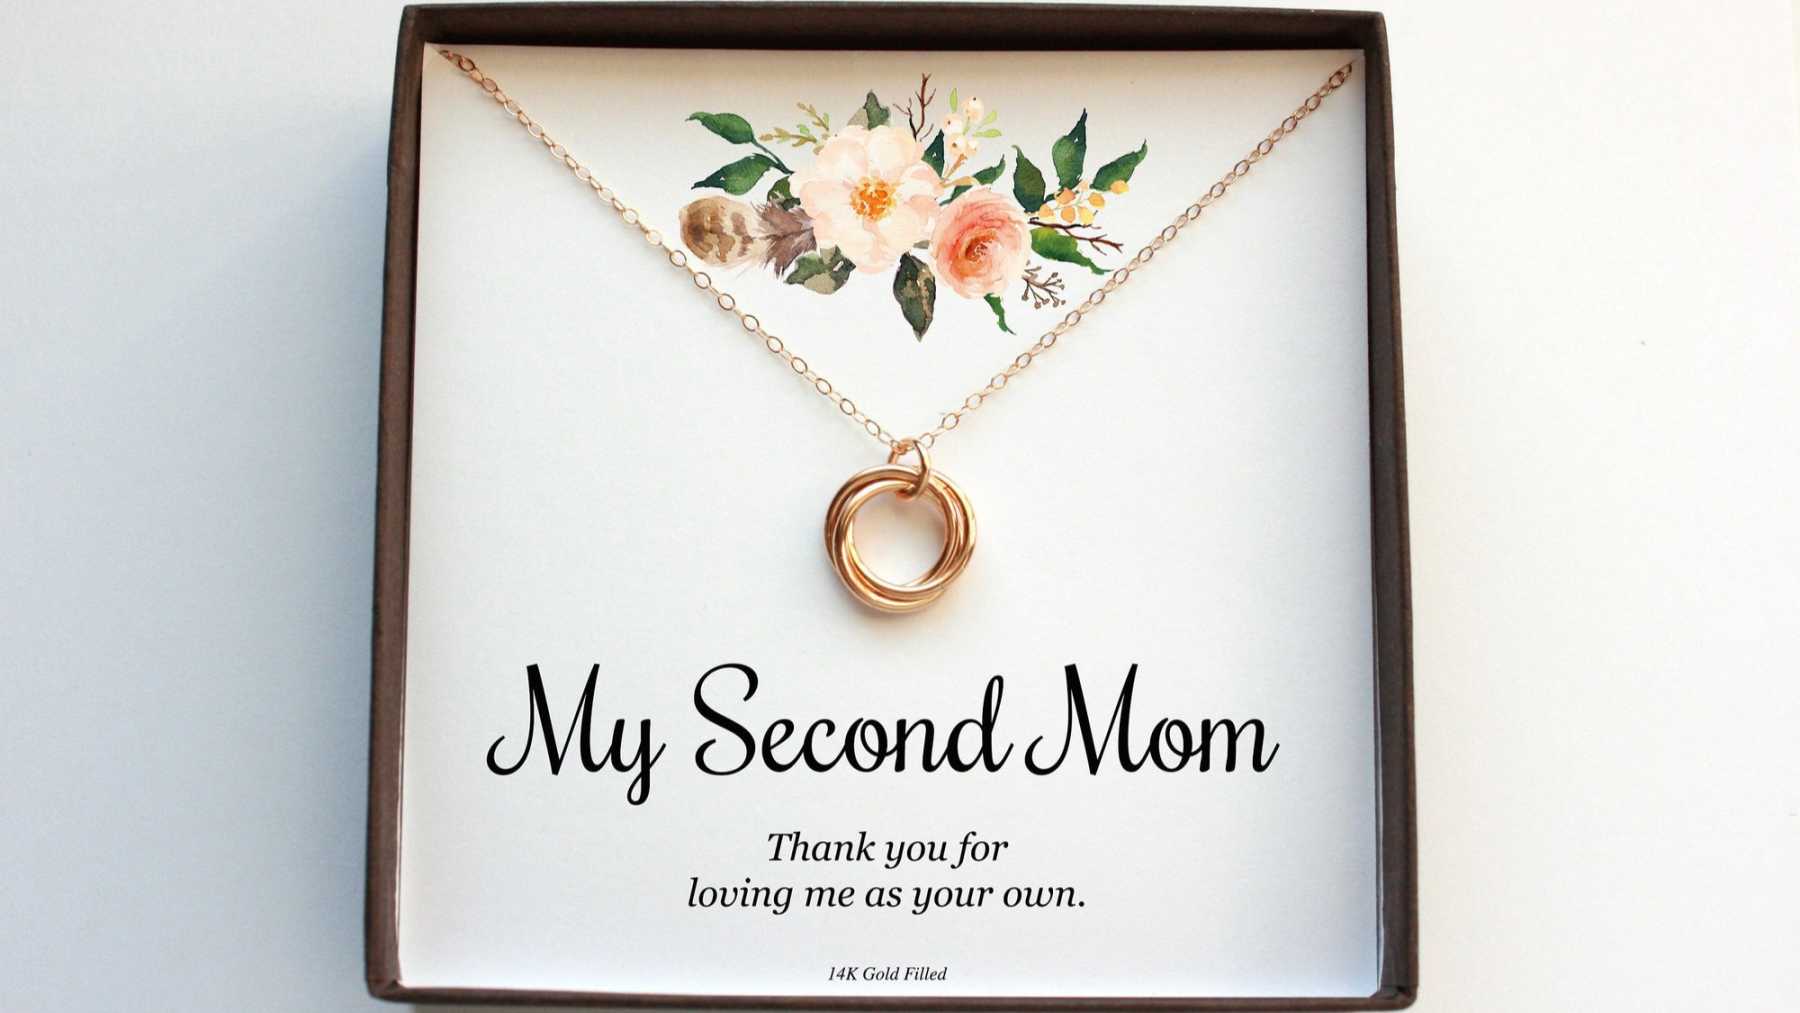 This mother's day I was able to gift my mommy with something she